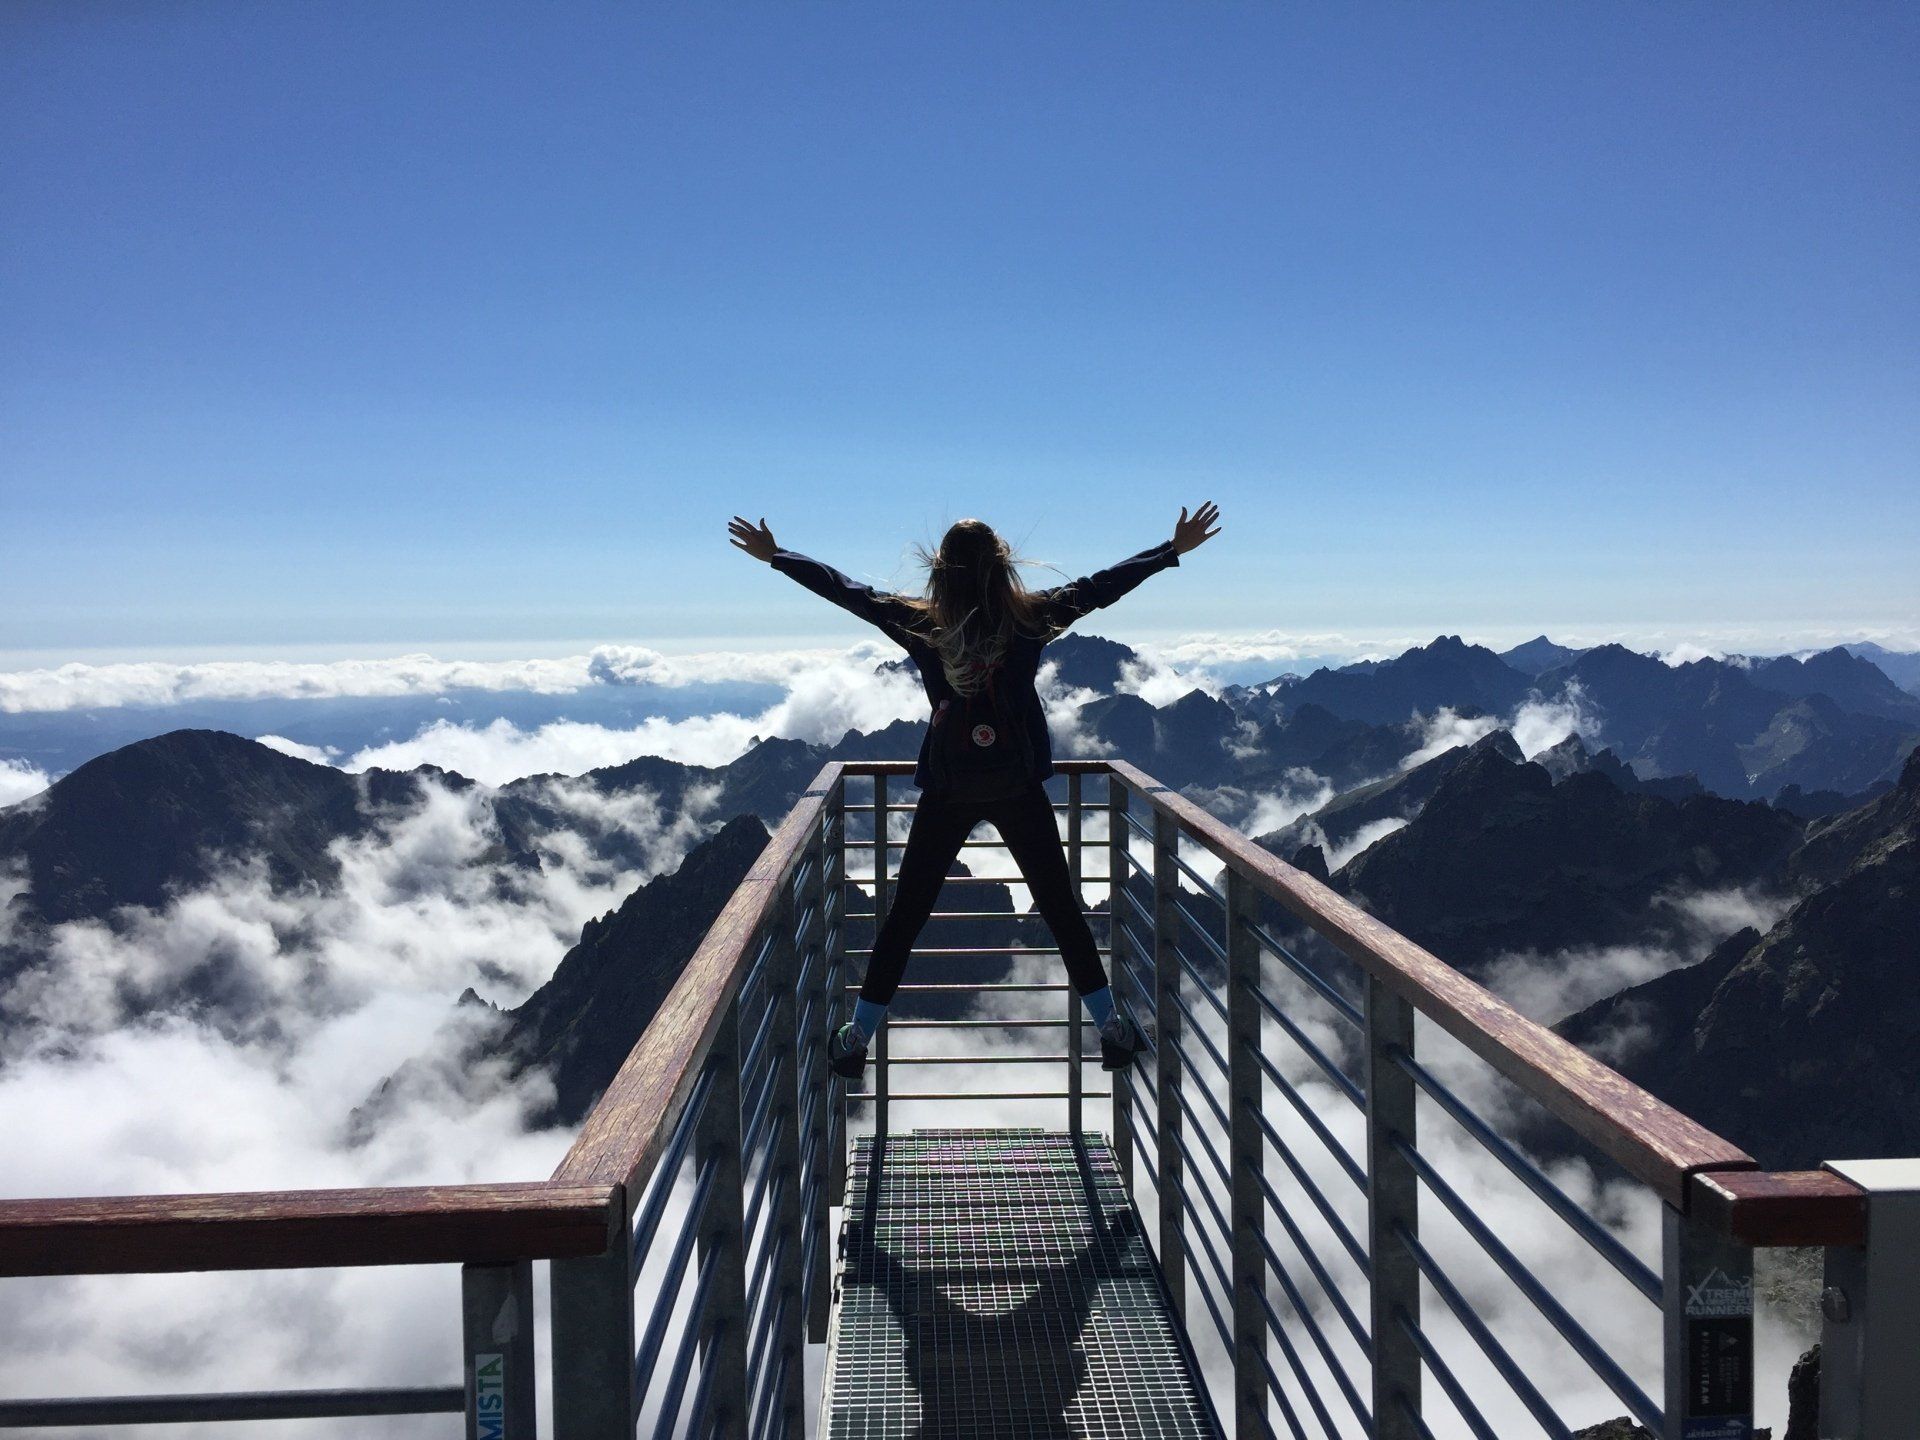 a woman is standing on a balcony overlooking mountains with her arms outstretched